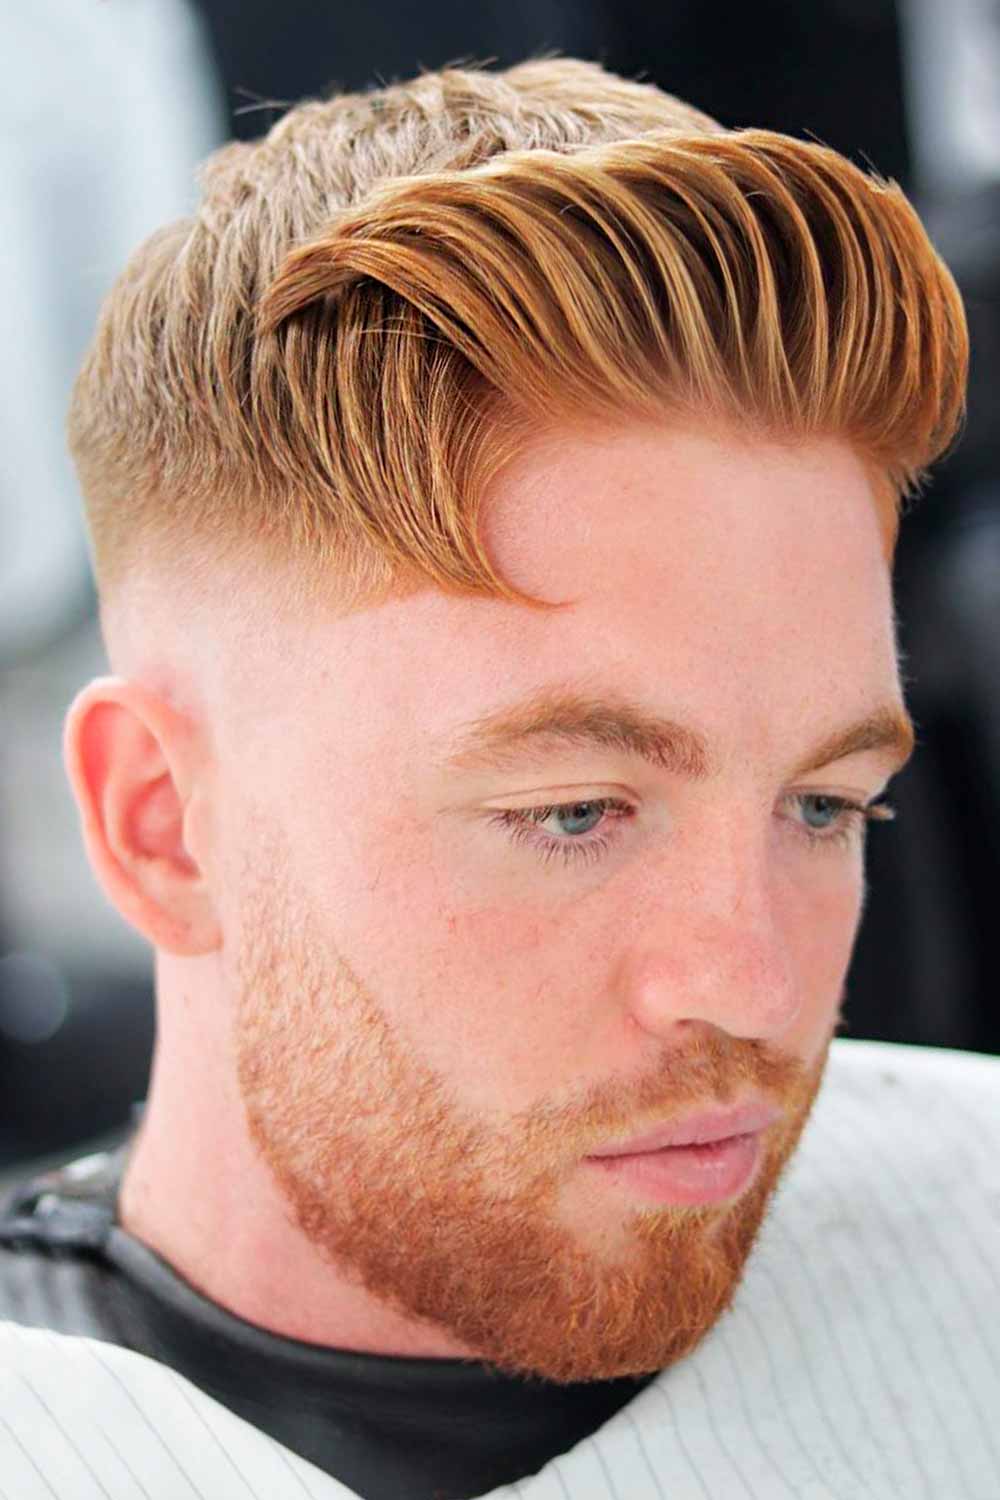 Quiff With Short Tapered Hair #taper #taperhaircut #taperedhair #taperedhaircut